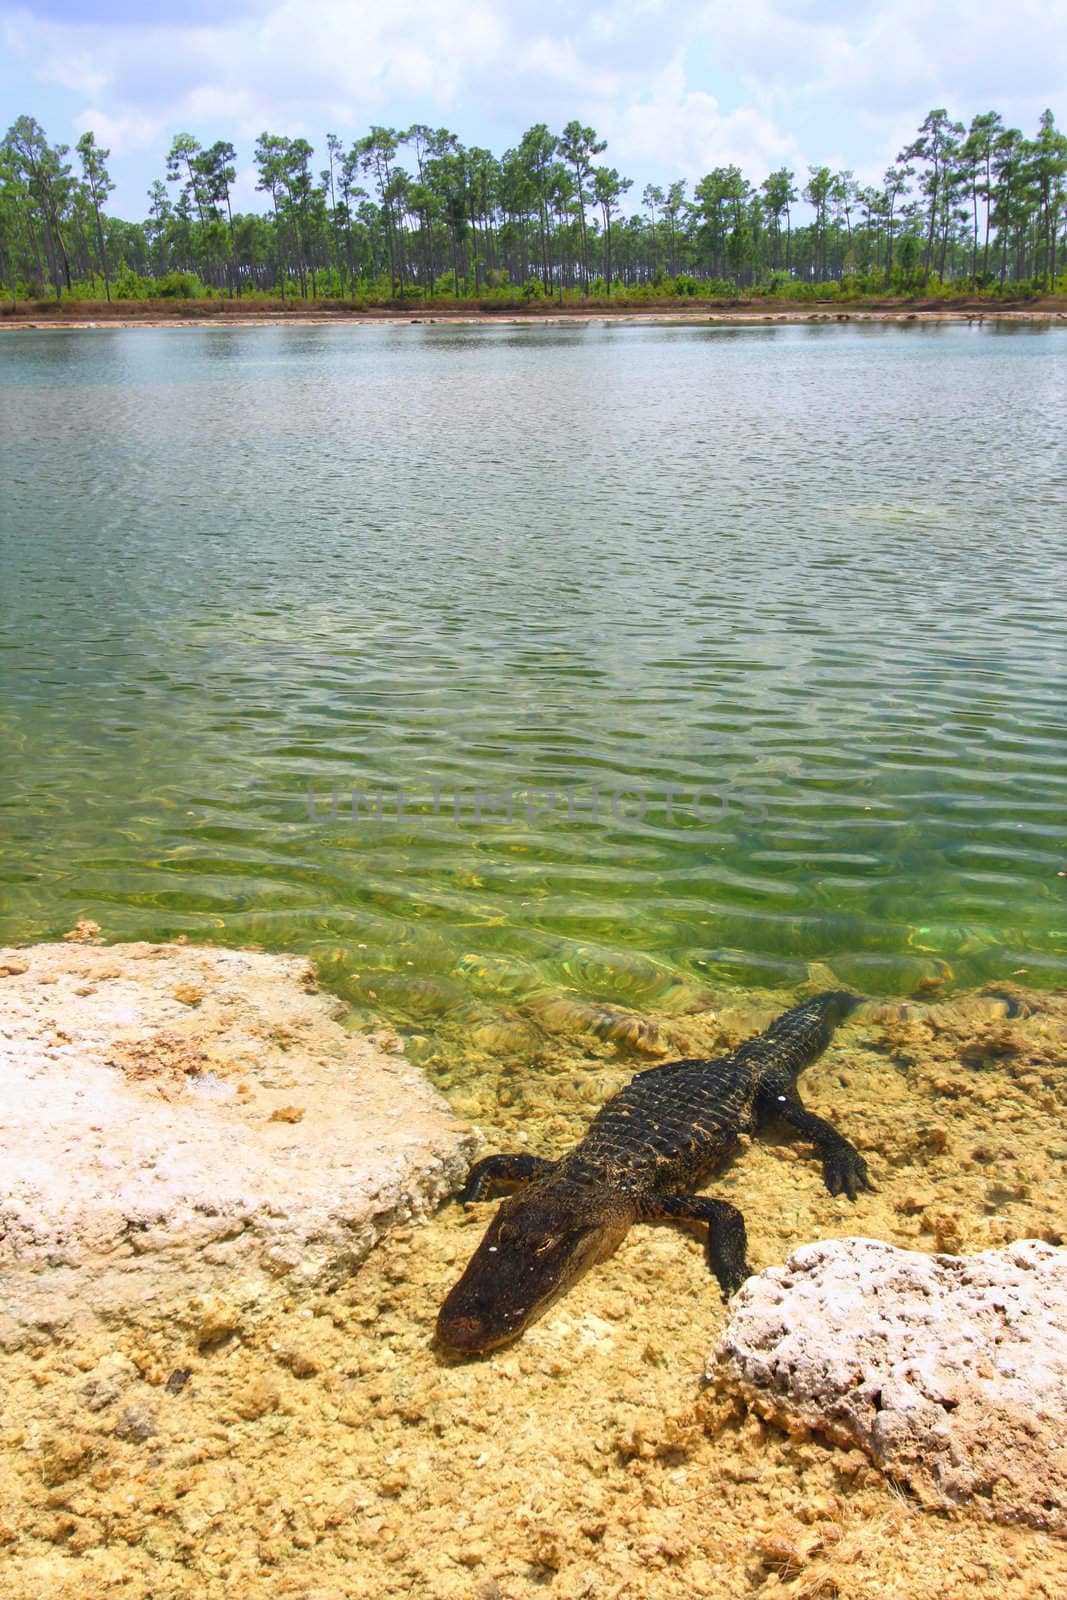 An American alligator rests in a clear pond at the Everglades National Park - Florida.